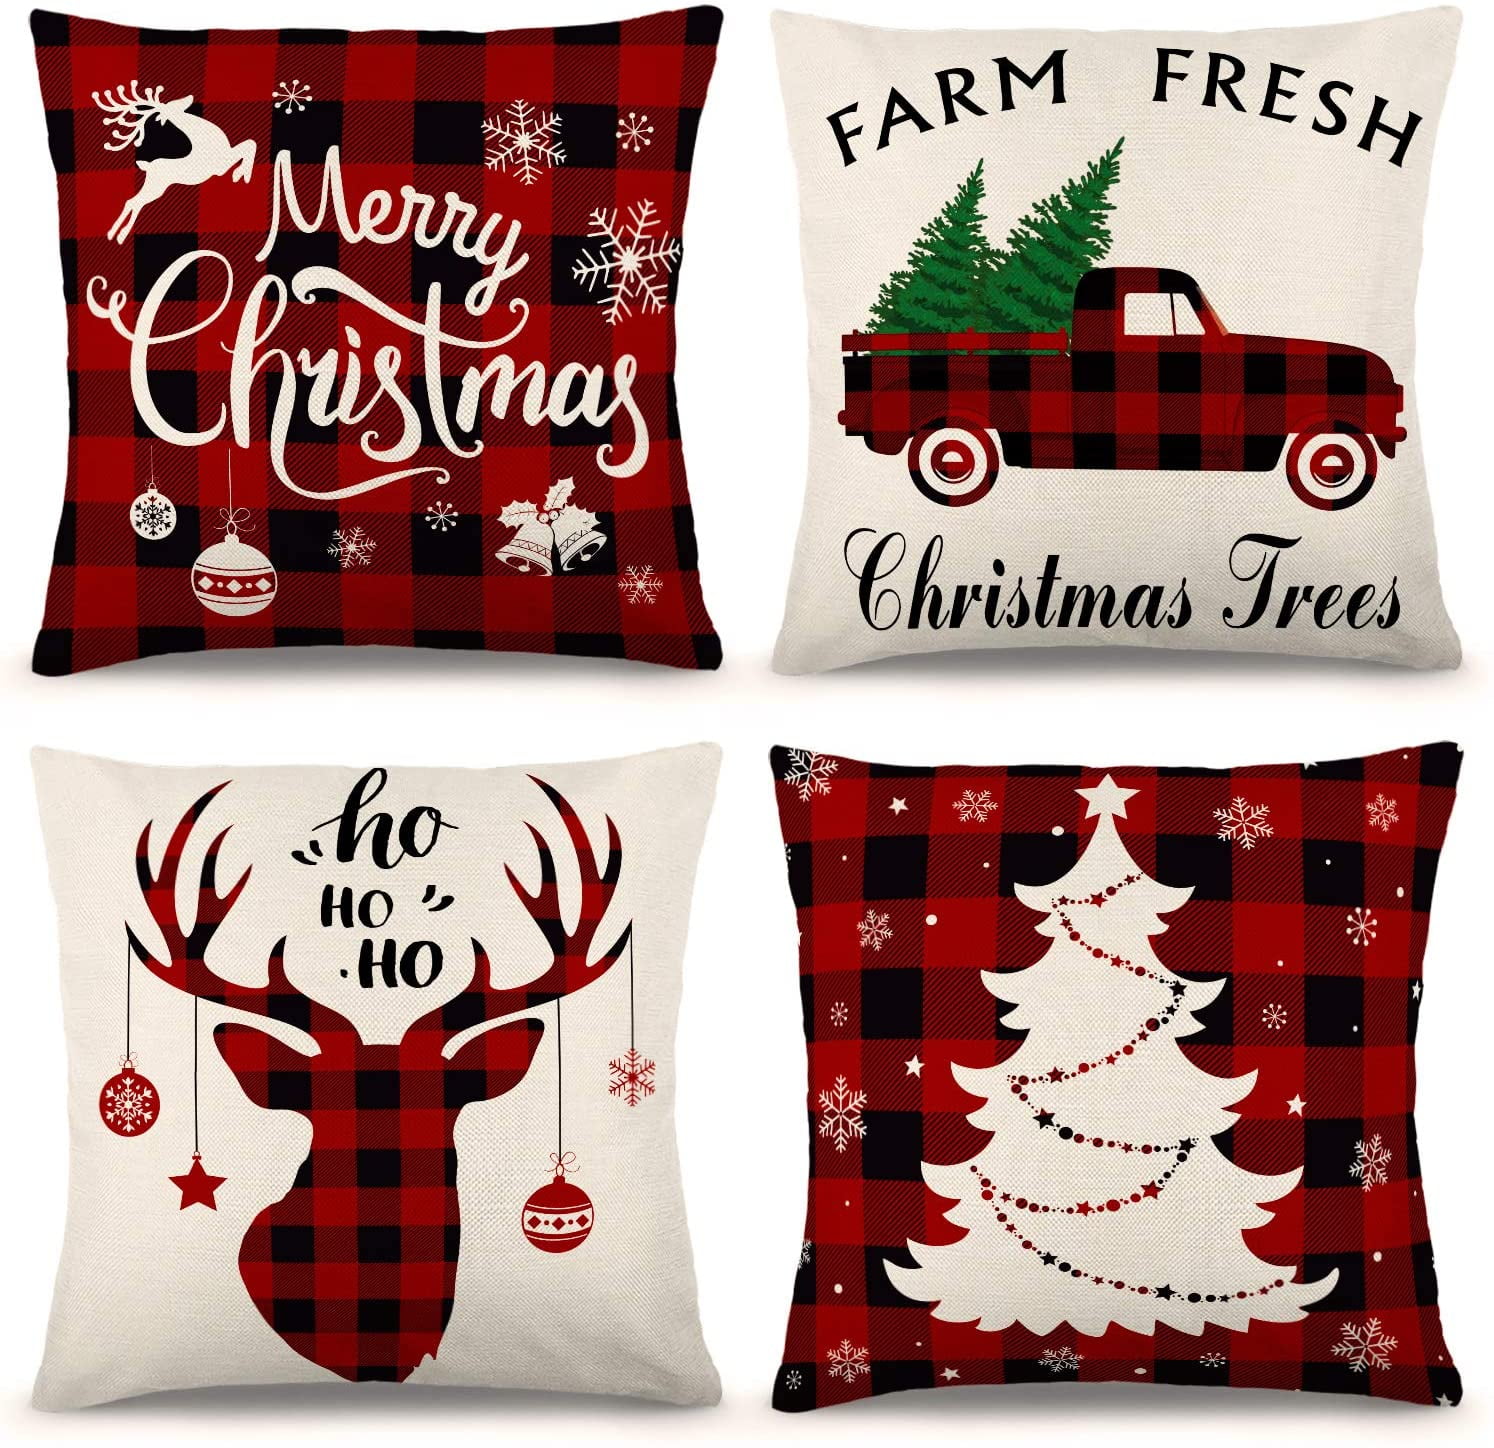 Christmas Decorations Farmhouse Decor Christmas Throw Pillow18 x 18 Inch Winter Holiday Rustic Farmhouse Linen Cushion Case for Sofa Couch Nature Christmas Pillows Merry Christmas Pillow Cover